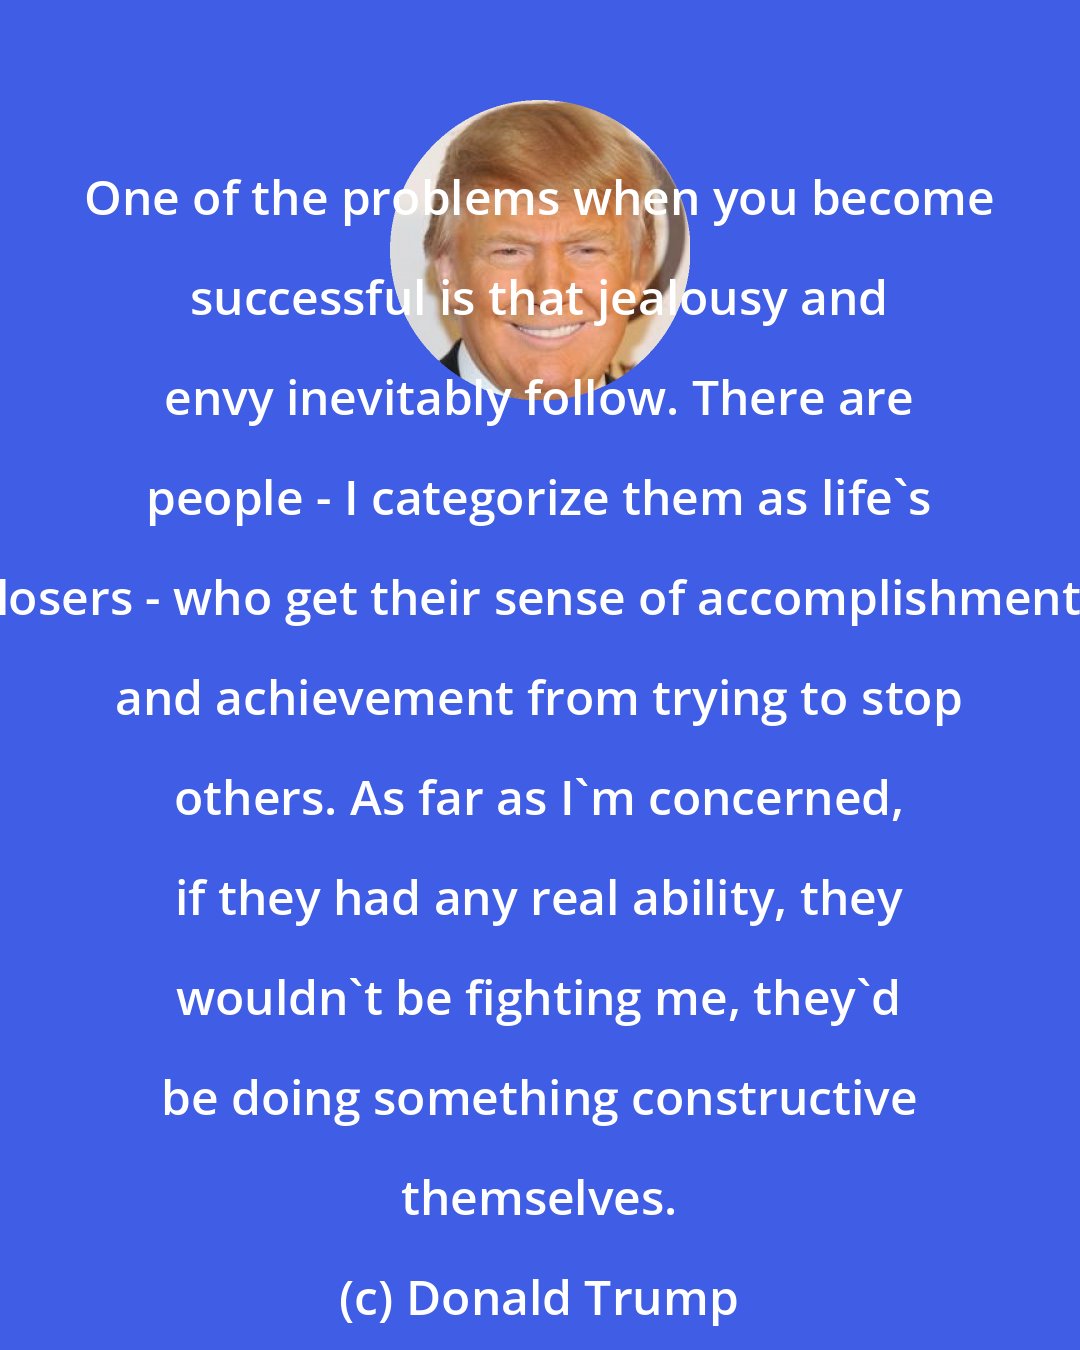 Donald Trump: One of the problems when you become successful is that jealousy and envy inevitably follow. There are people - I categorize them as life's losers - who get their sense of accomplishment and achievement from trying to stop others. As far as I'm concerned, if they had any real ability, they wouldn't be fighting me, they'd be doing something constructive themselves.